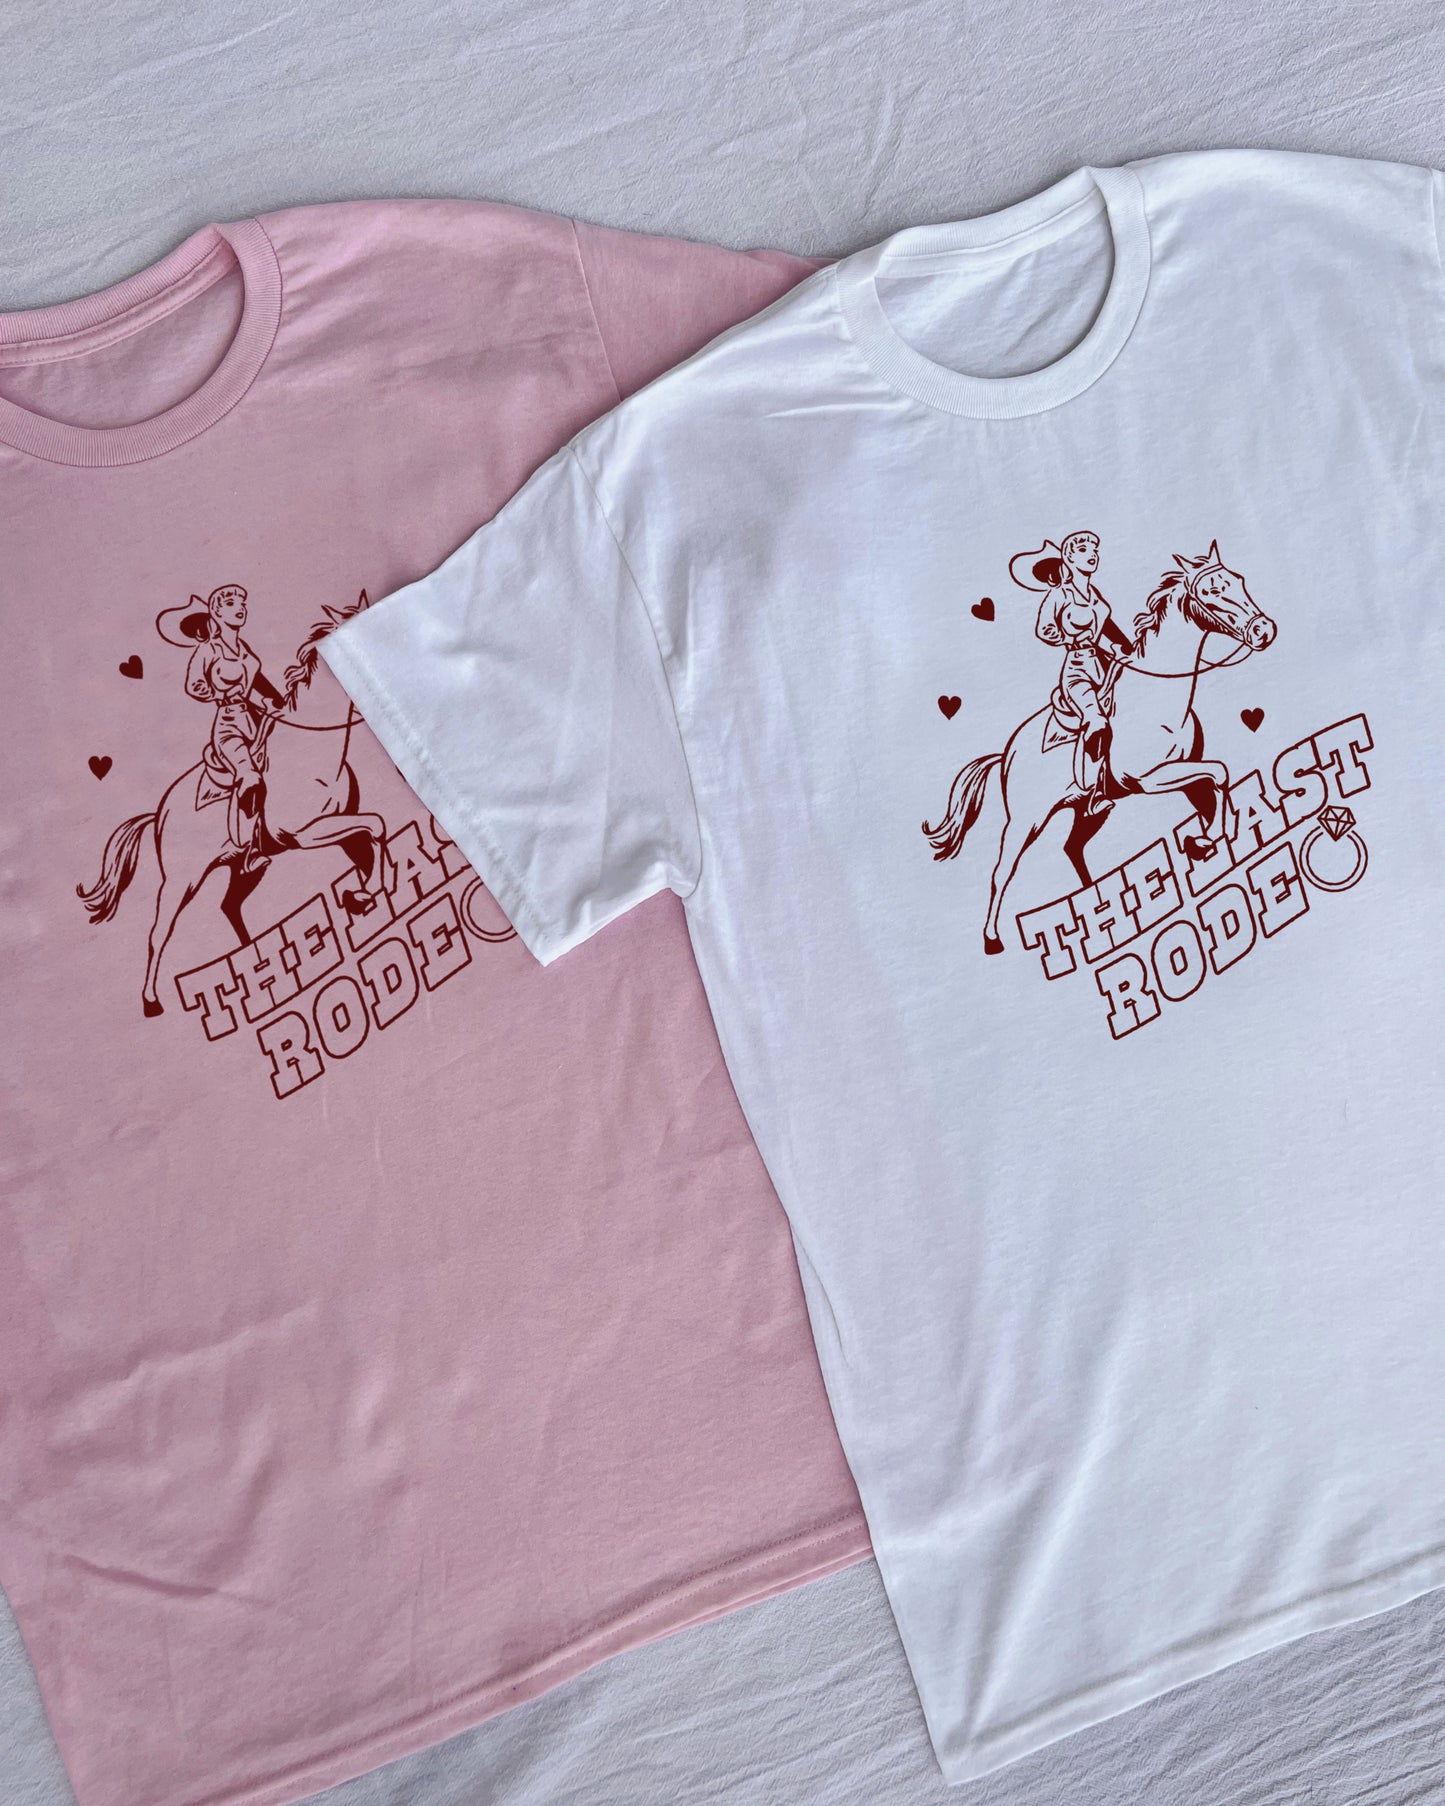 The Last Rodeo Bachelorette Party Tees